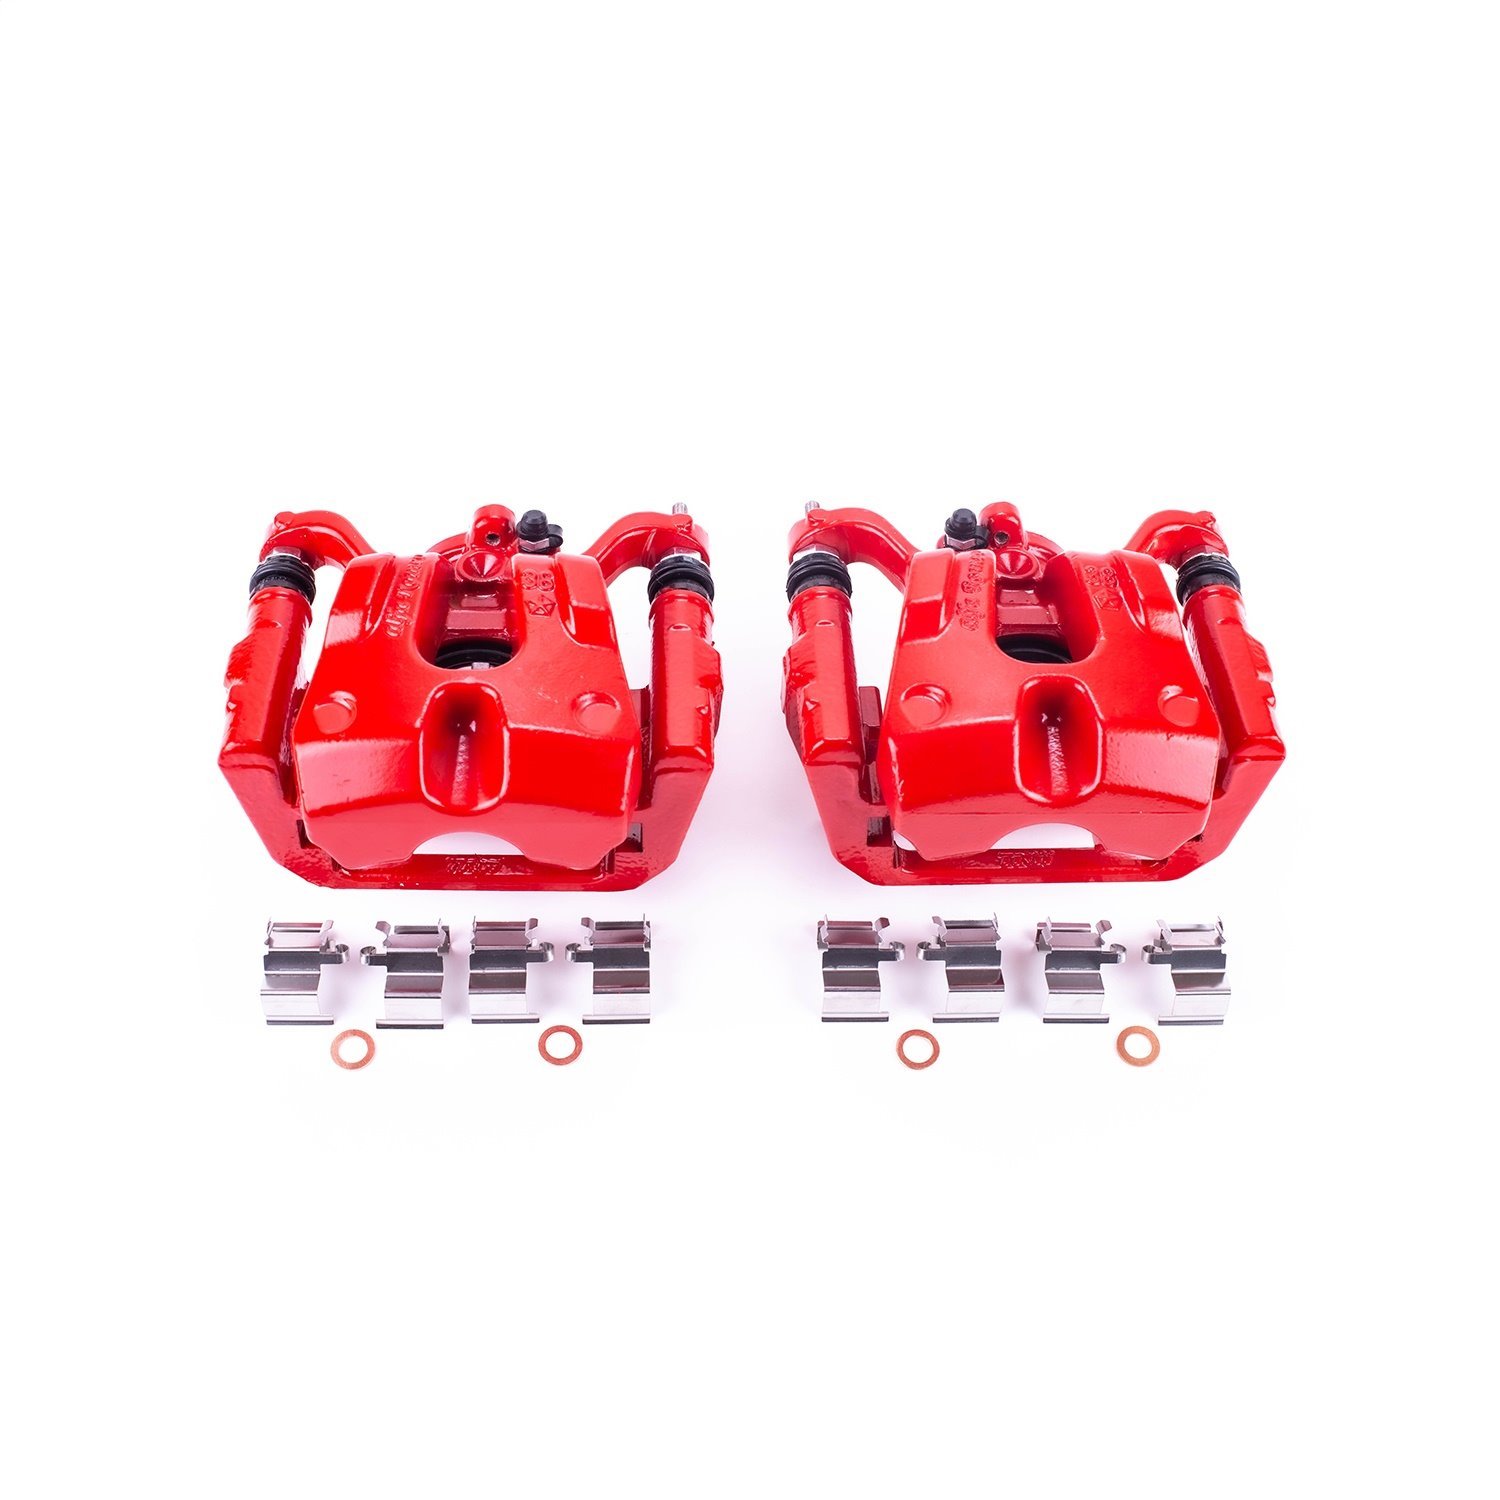 Front Brake Calipers Fits 2014-2020 Jeep Cherokee; 2015-2017 Chrysler 200 [Red Powder-Coat Finish]